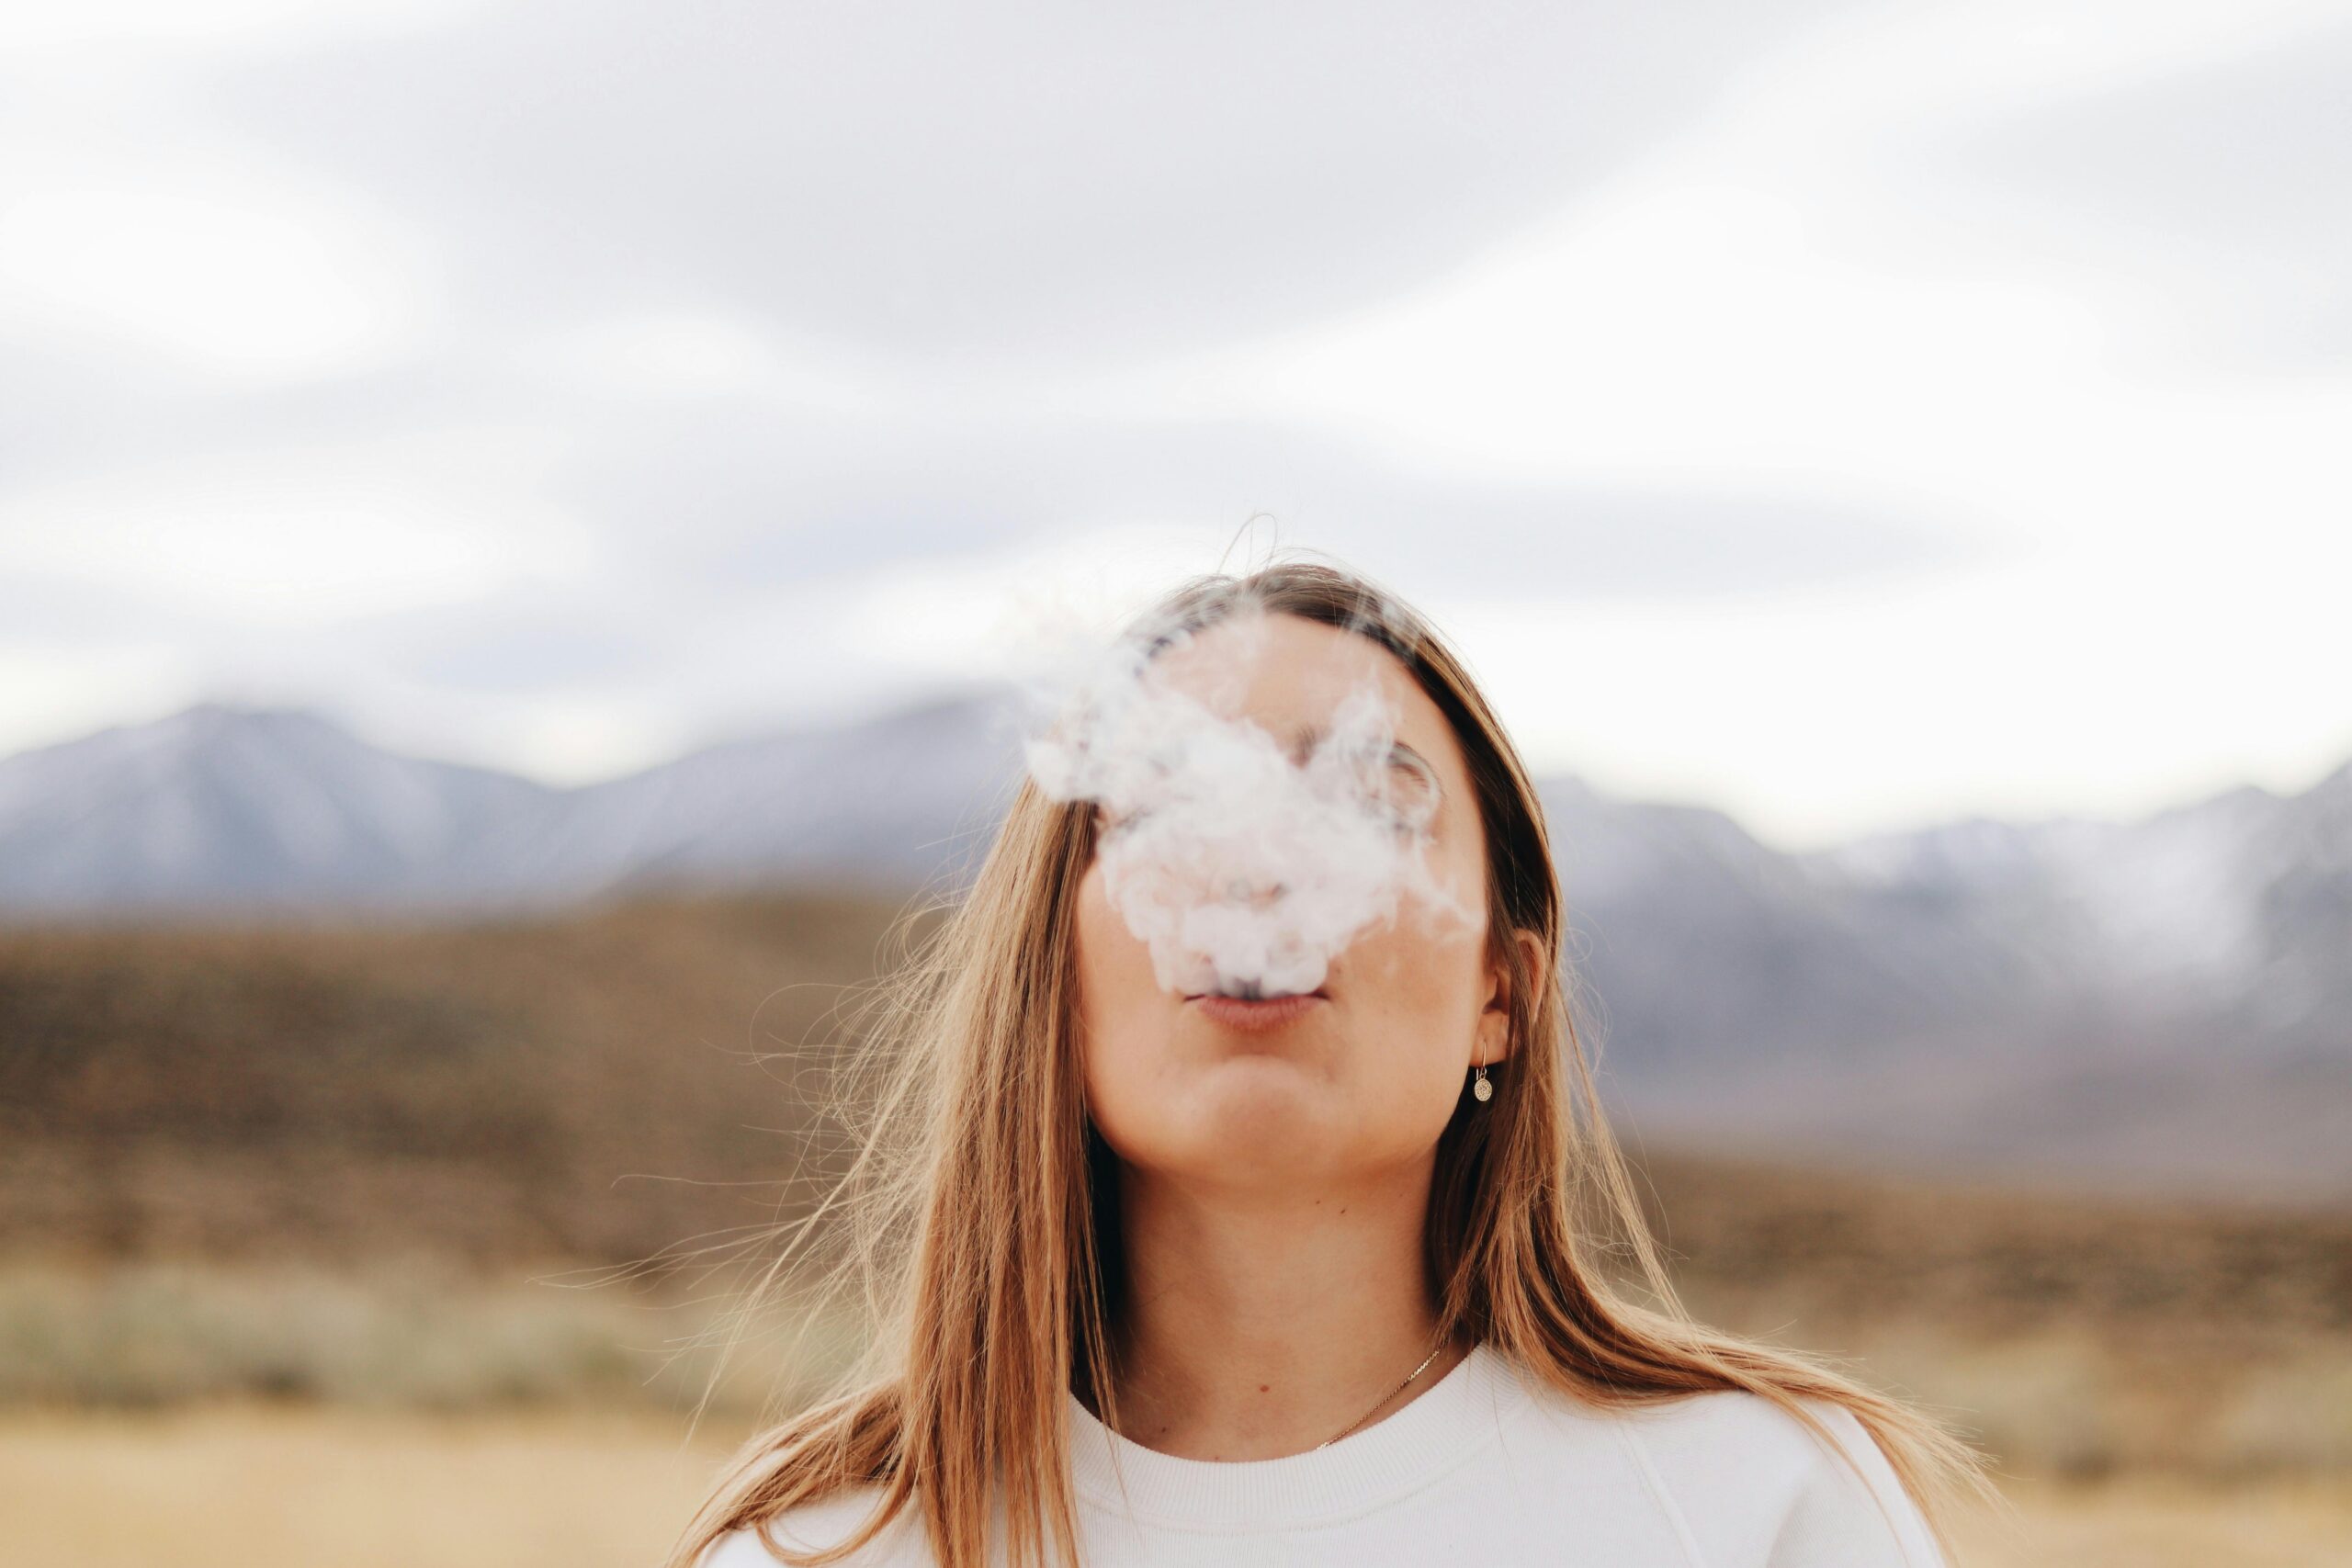 Does Weed Cause Bad Breath?